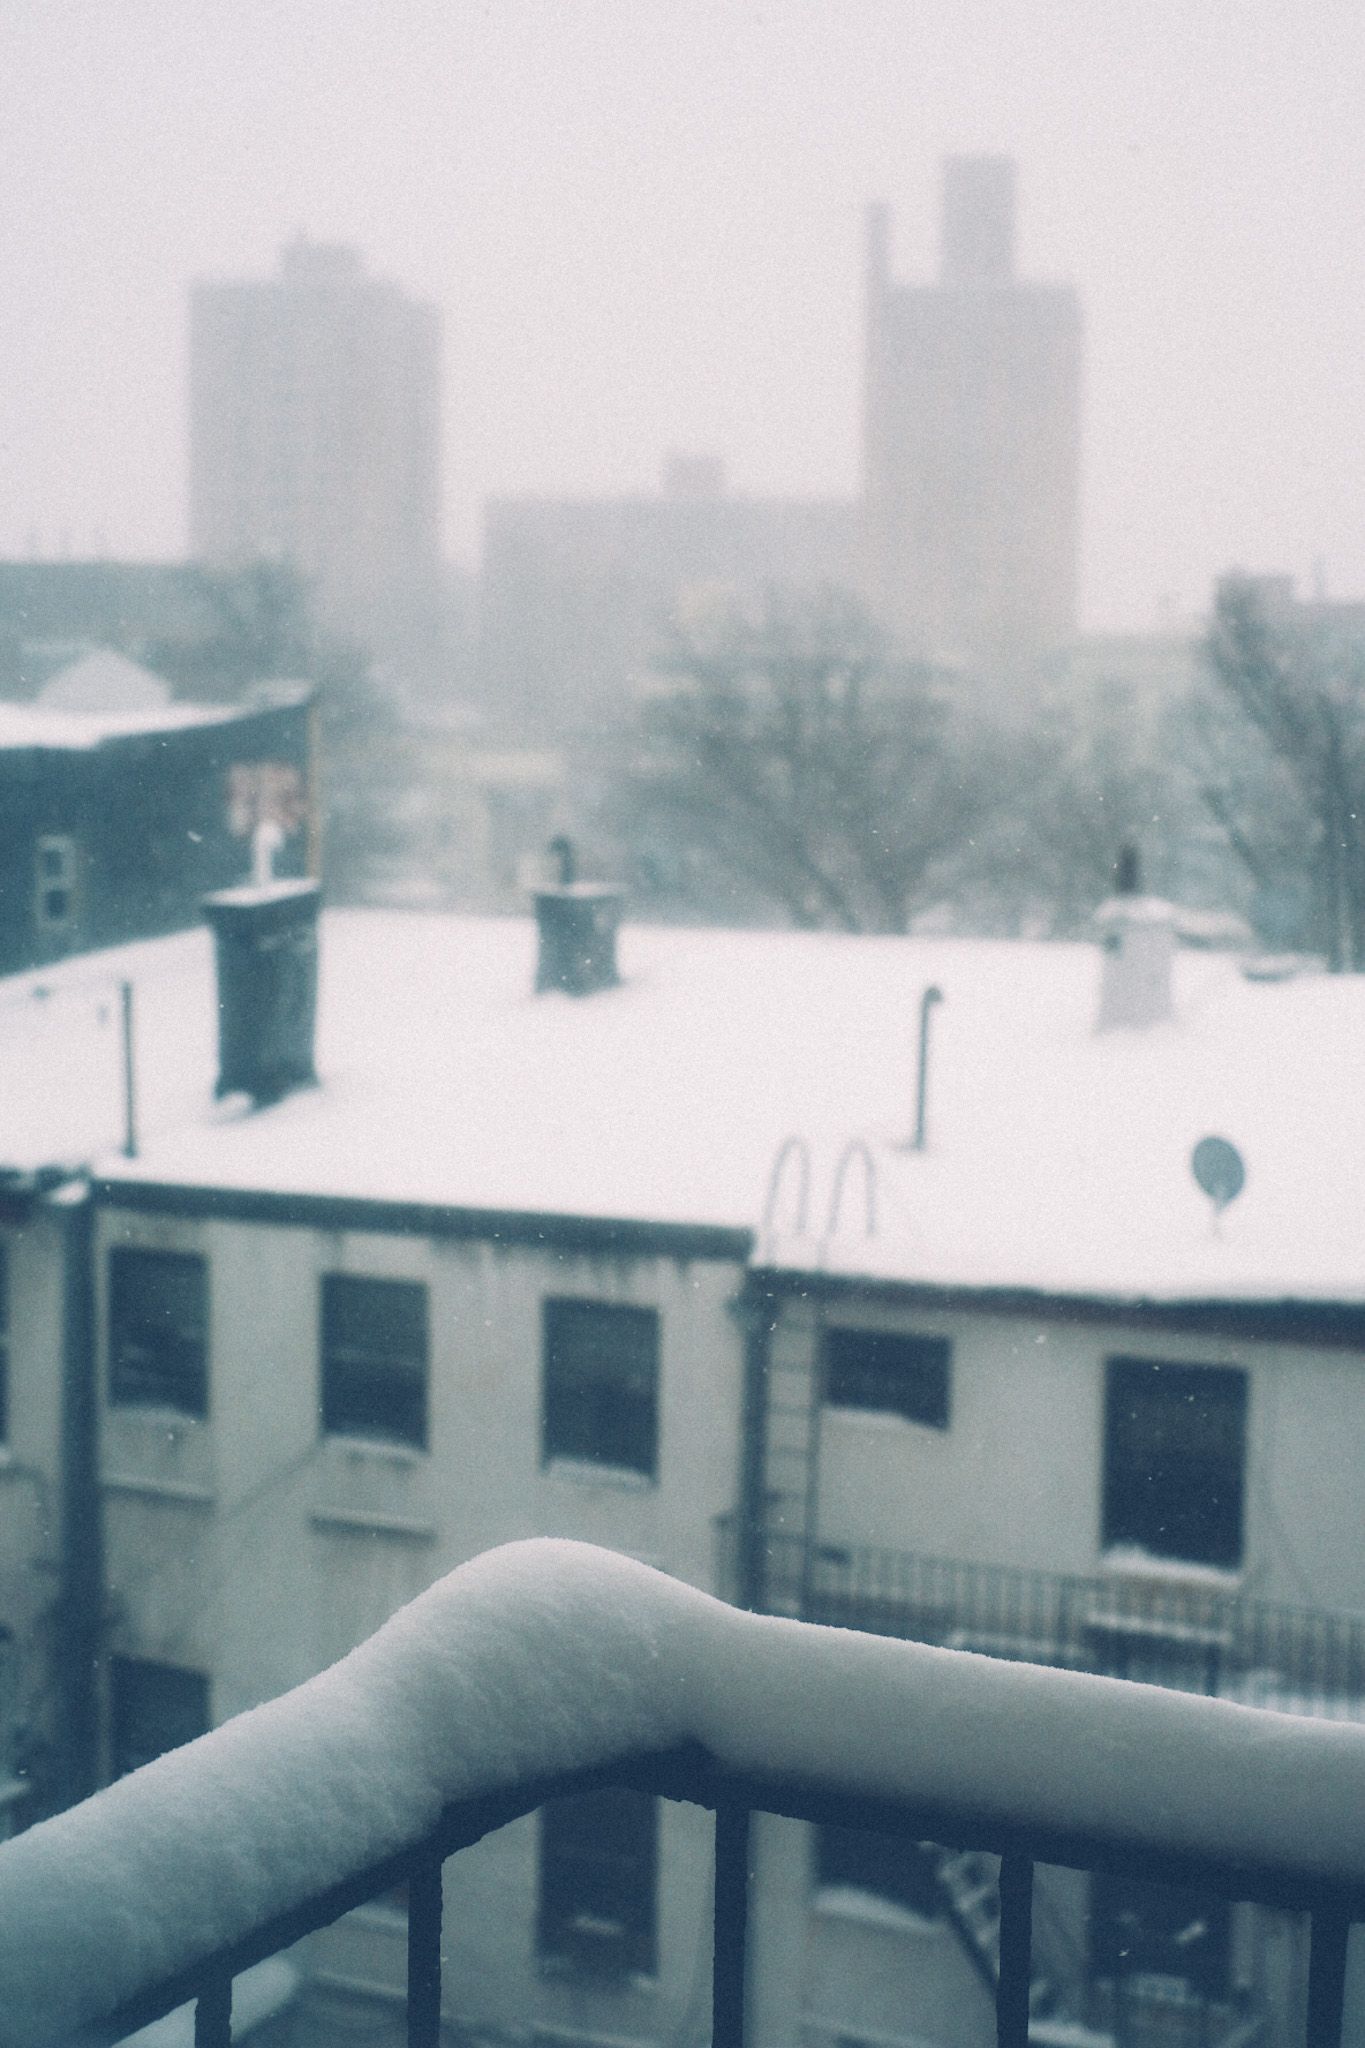 A view outside of an apartment window on a snowy day: a few inches of snow pile upon the fire escape while in the distance, buildings are enveloped in a dreamy winter fog.